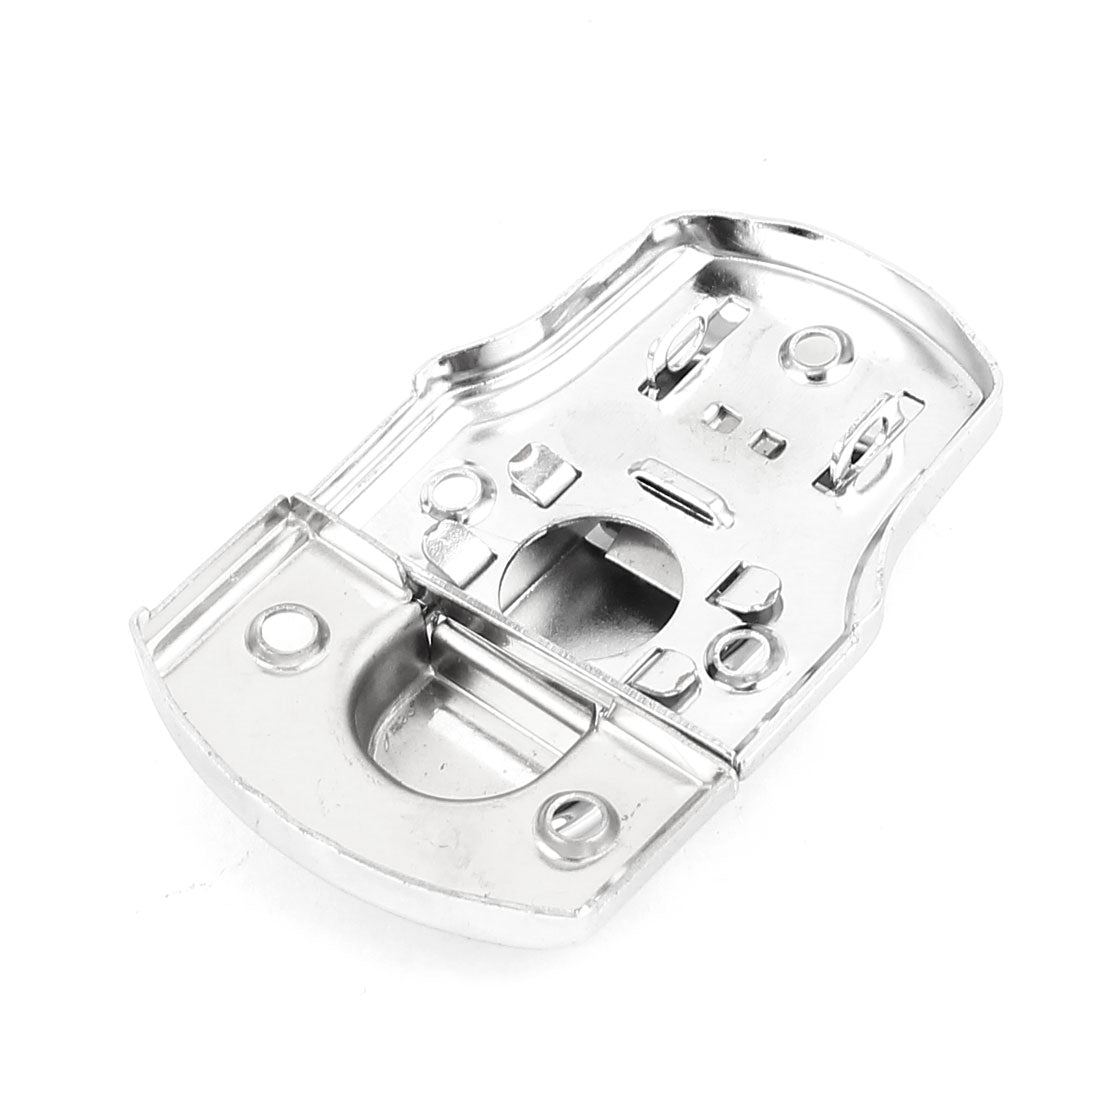 uxcell Uxcell Suitcase Luggage Chest Trunk Lock Metal Toggle Catch Latch Clasp Silver Tone 76mmx45mm